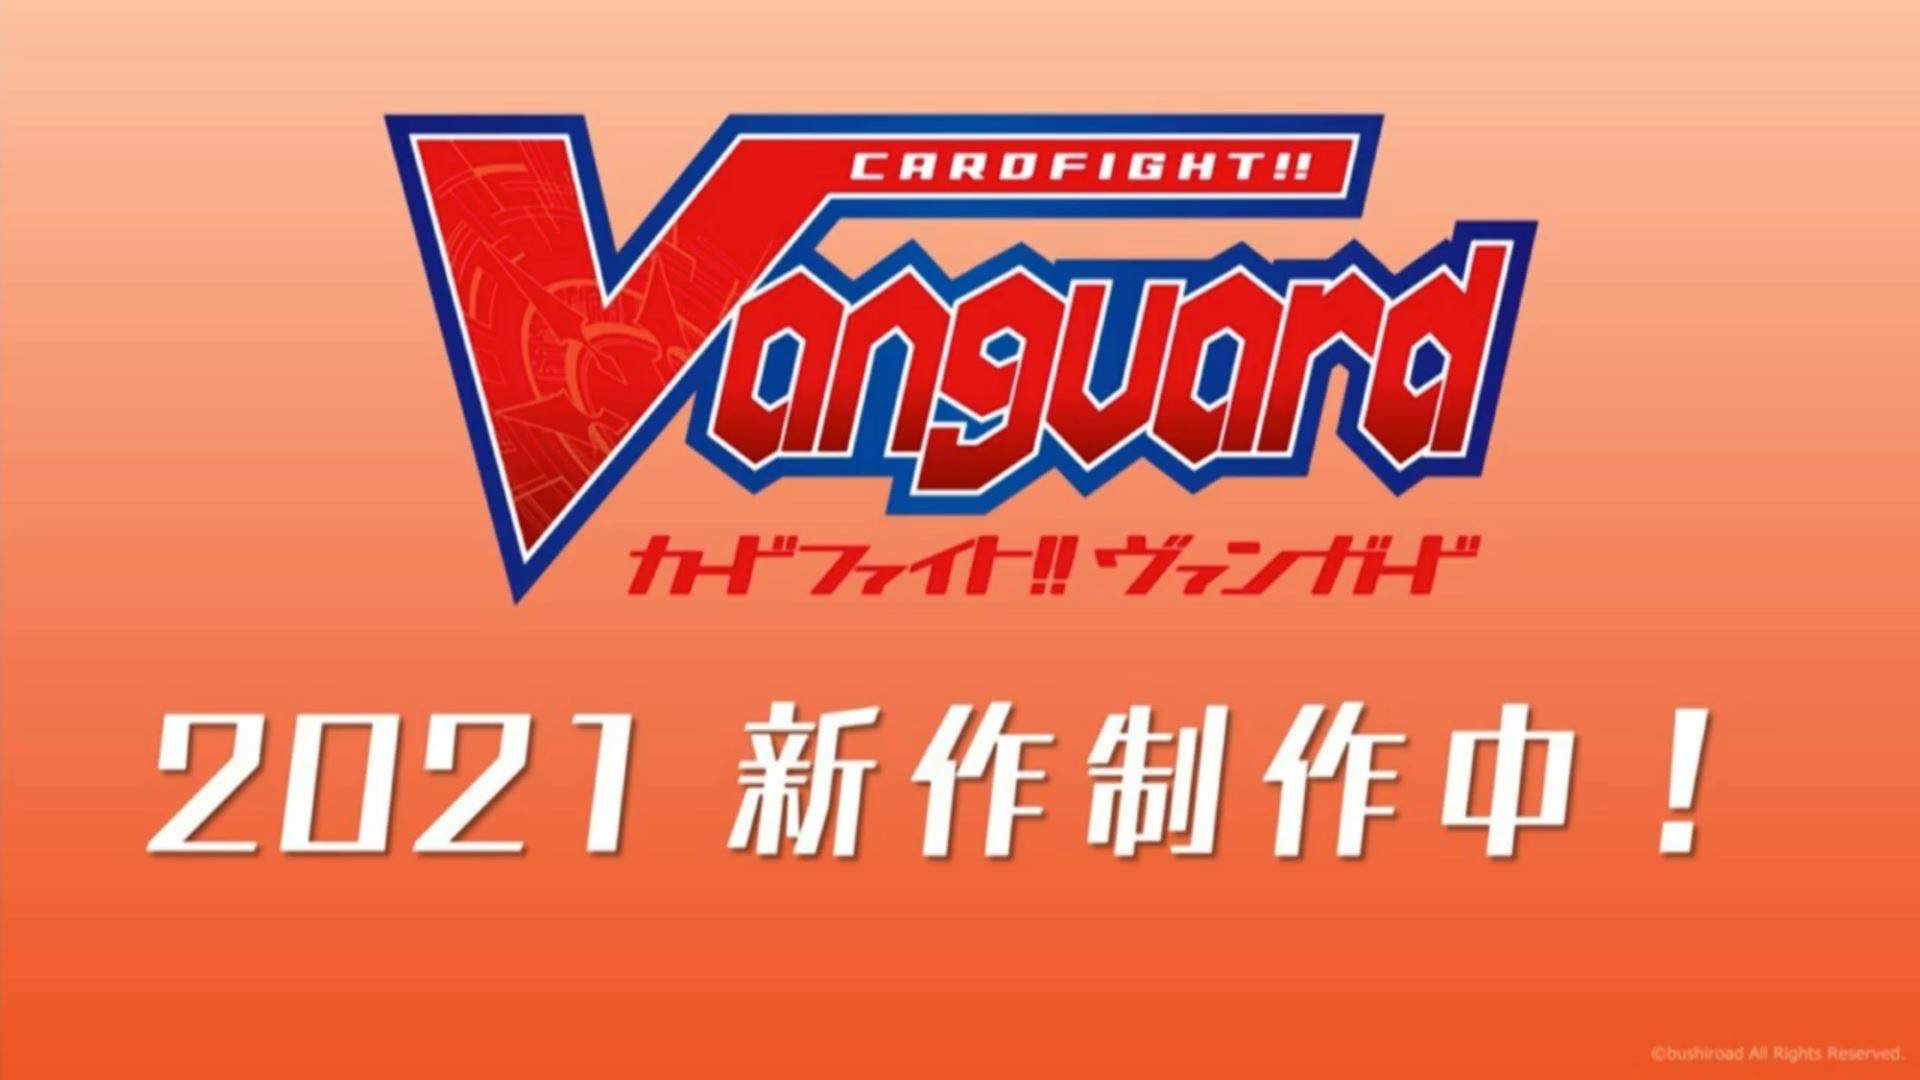 cardfight vanguard products